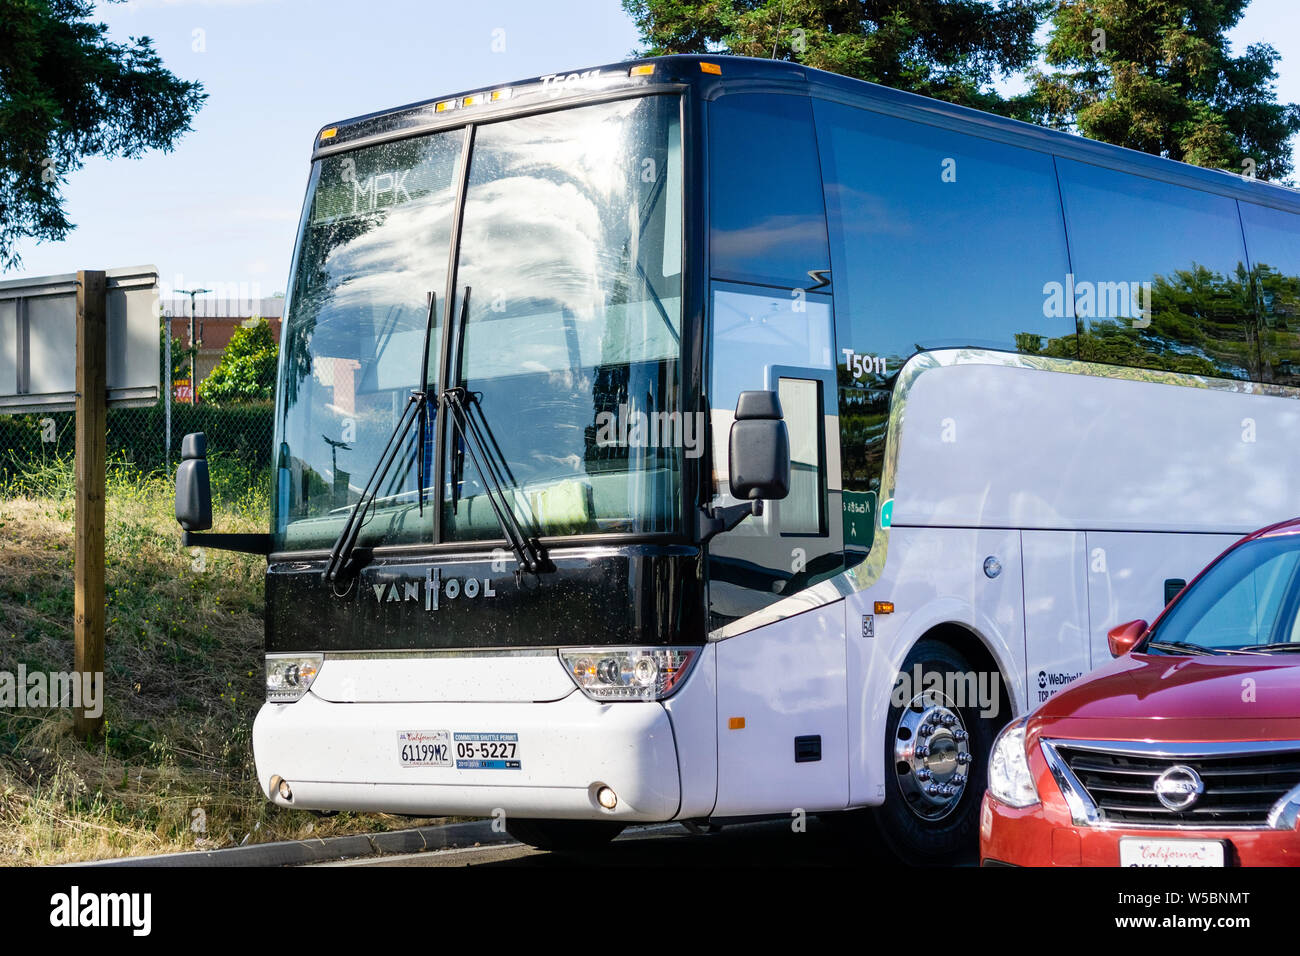 June 26, 2019 Fremont / CA / USA - Facebook shuttle bus taking employees from the East San Francisco bay area to the Company's headquarters in Menlo P Stock Photo